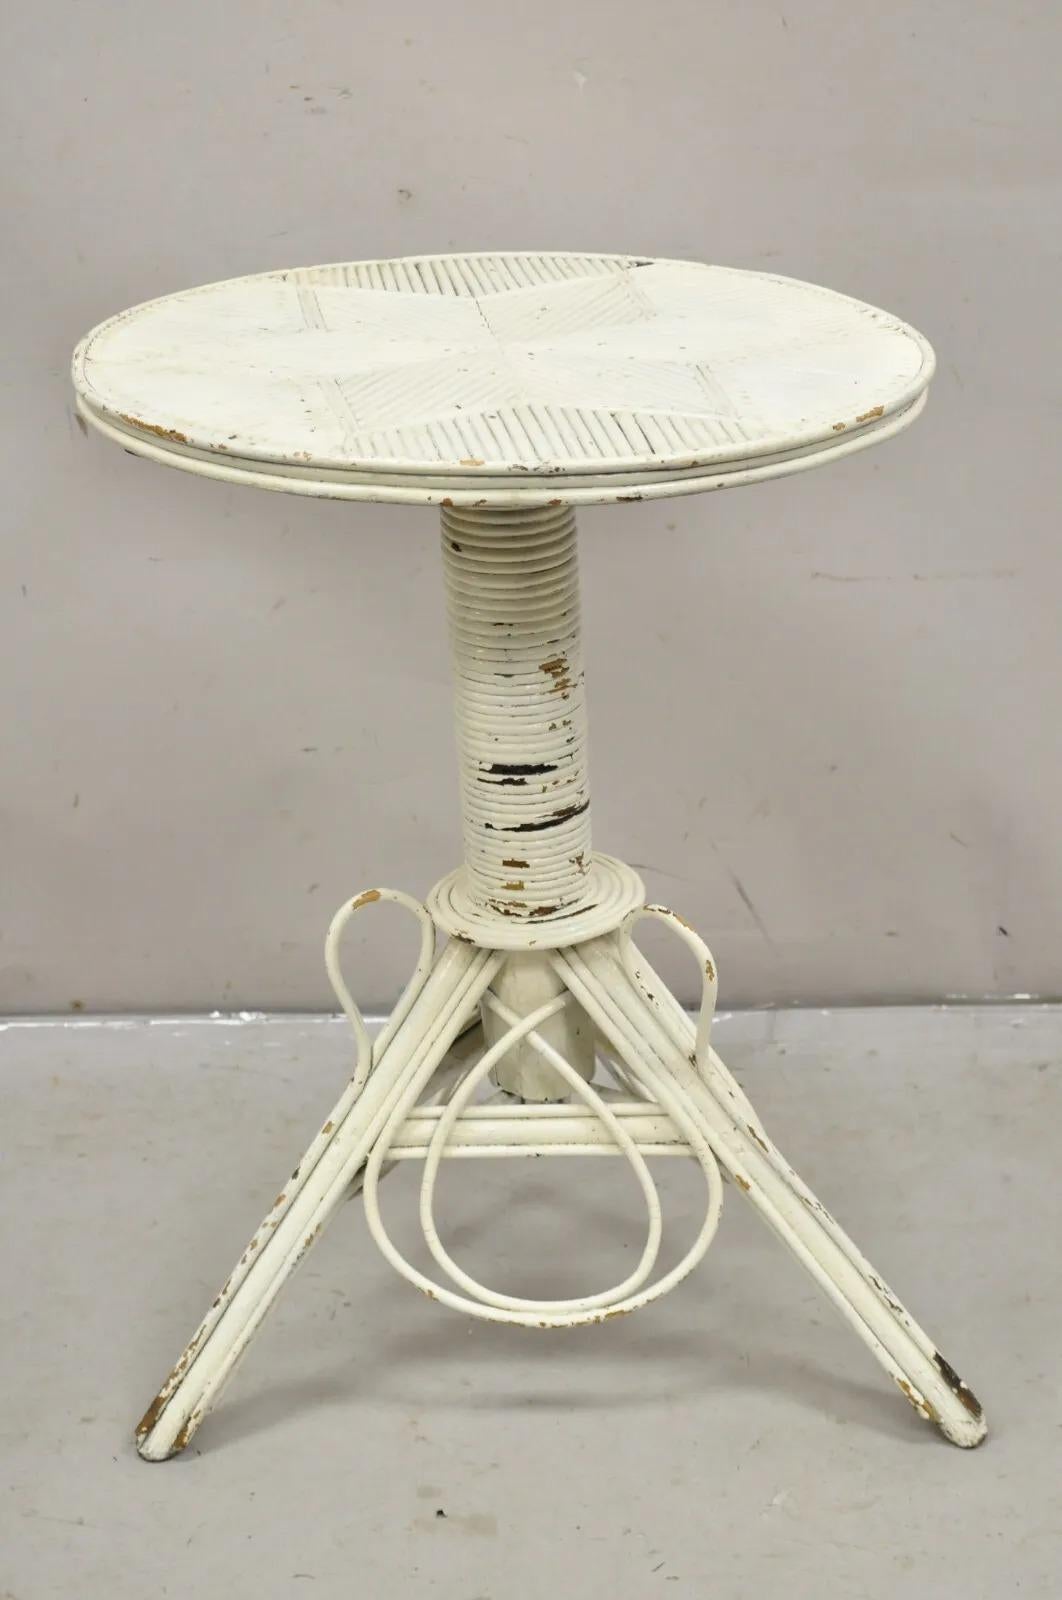 Antique Victorian Bentwood Wicker Rattan White Painted Accent Side Table. Circa 19th Century. Measurements: 29